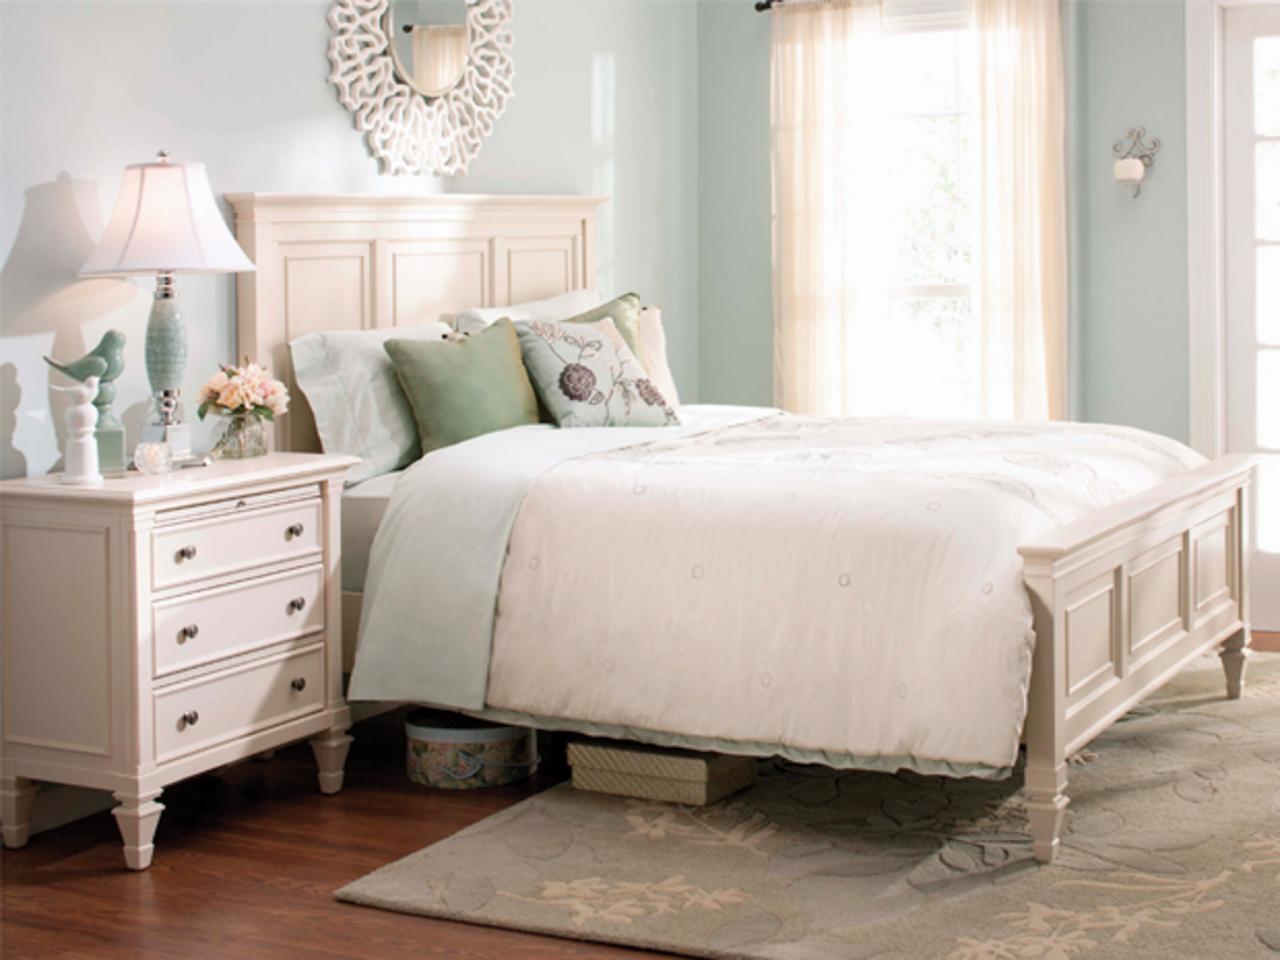 Quick Tips For Organizing Bedrooms HGTV